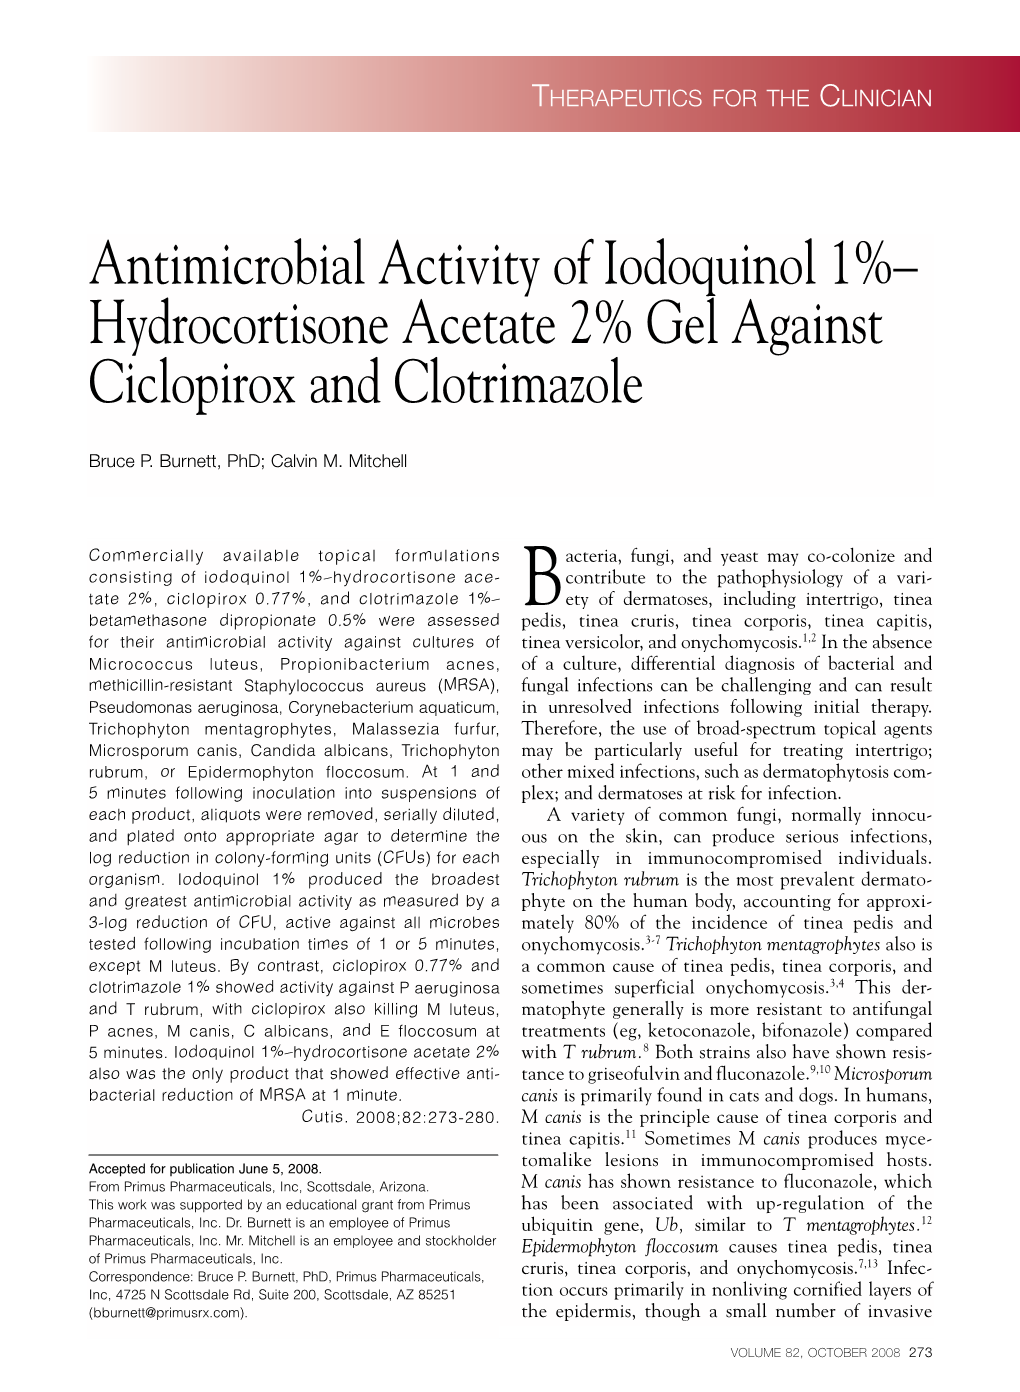 Antimicrobial Activity of Iodoquinol 1%– Hydrocortisone Acetate 2% Gel Against Ciclopirox and Clotrimazole